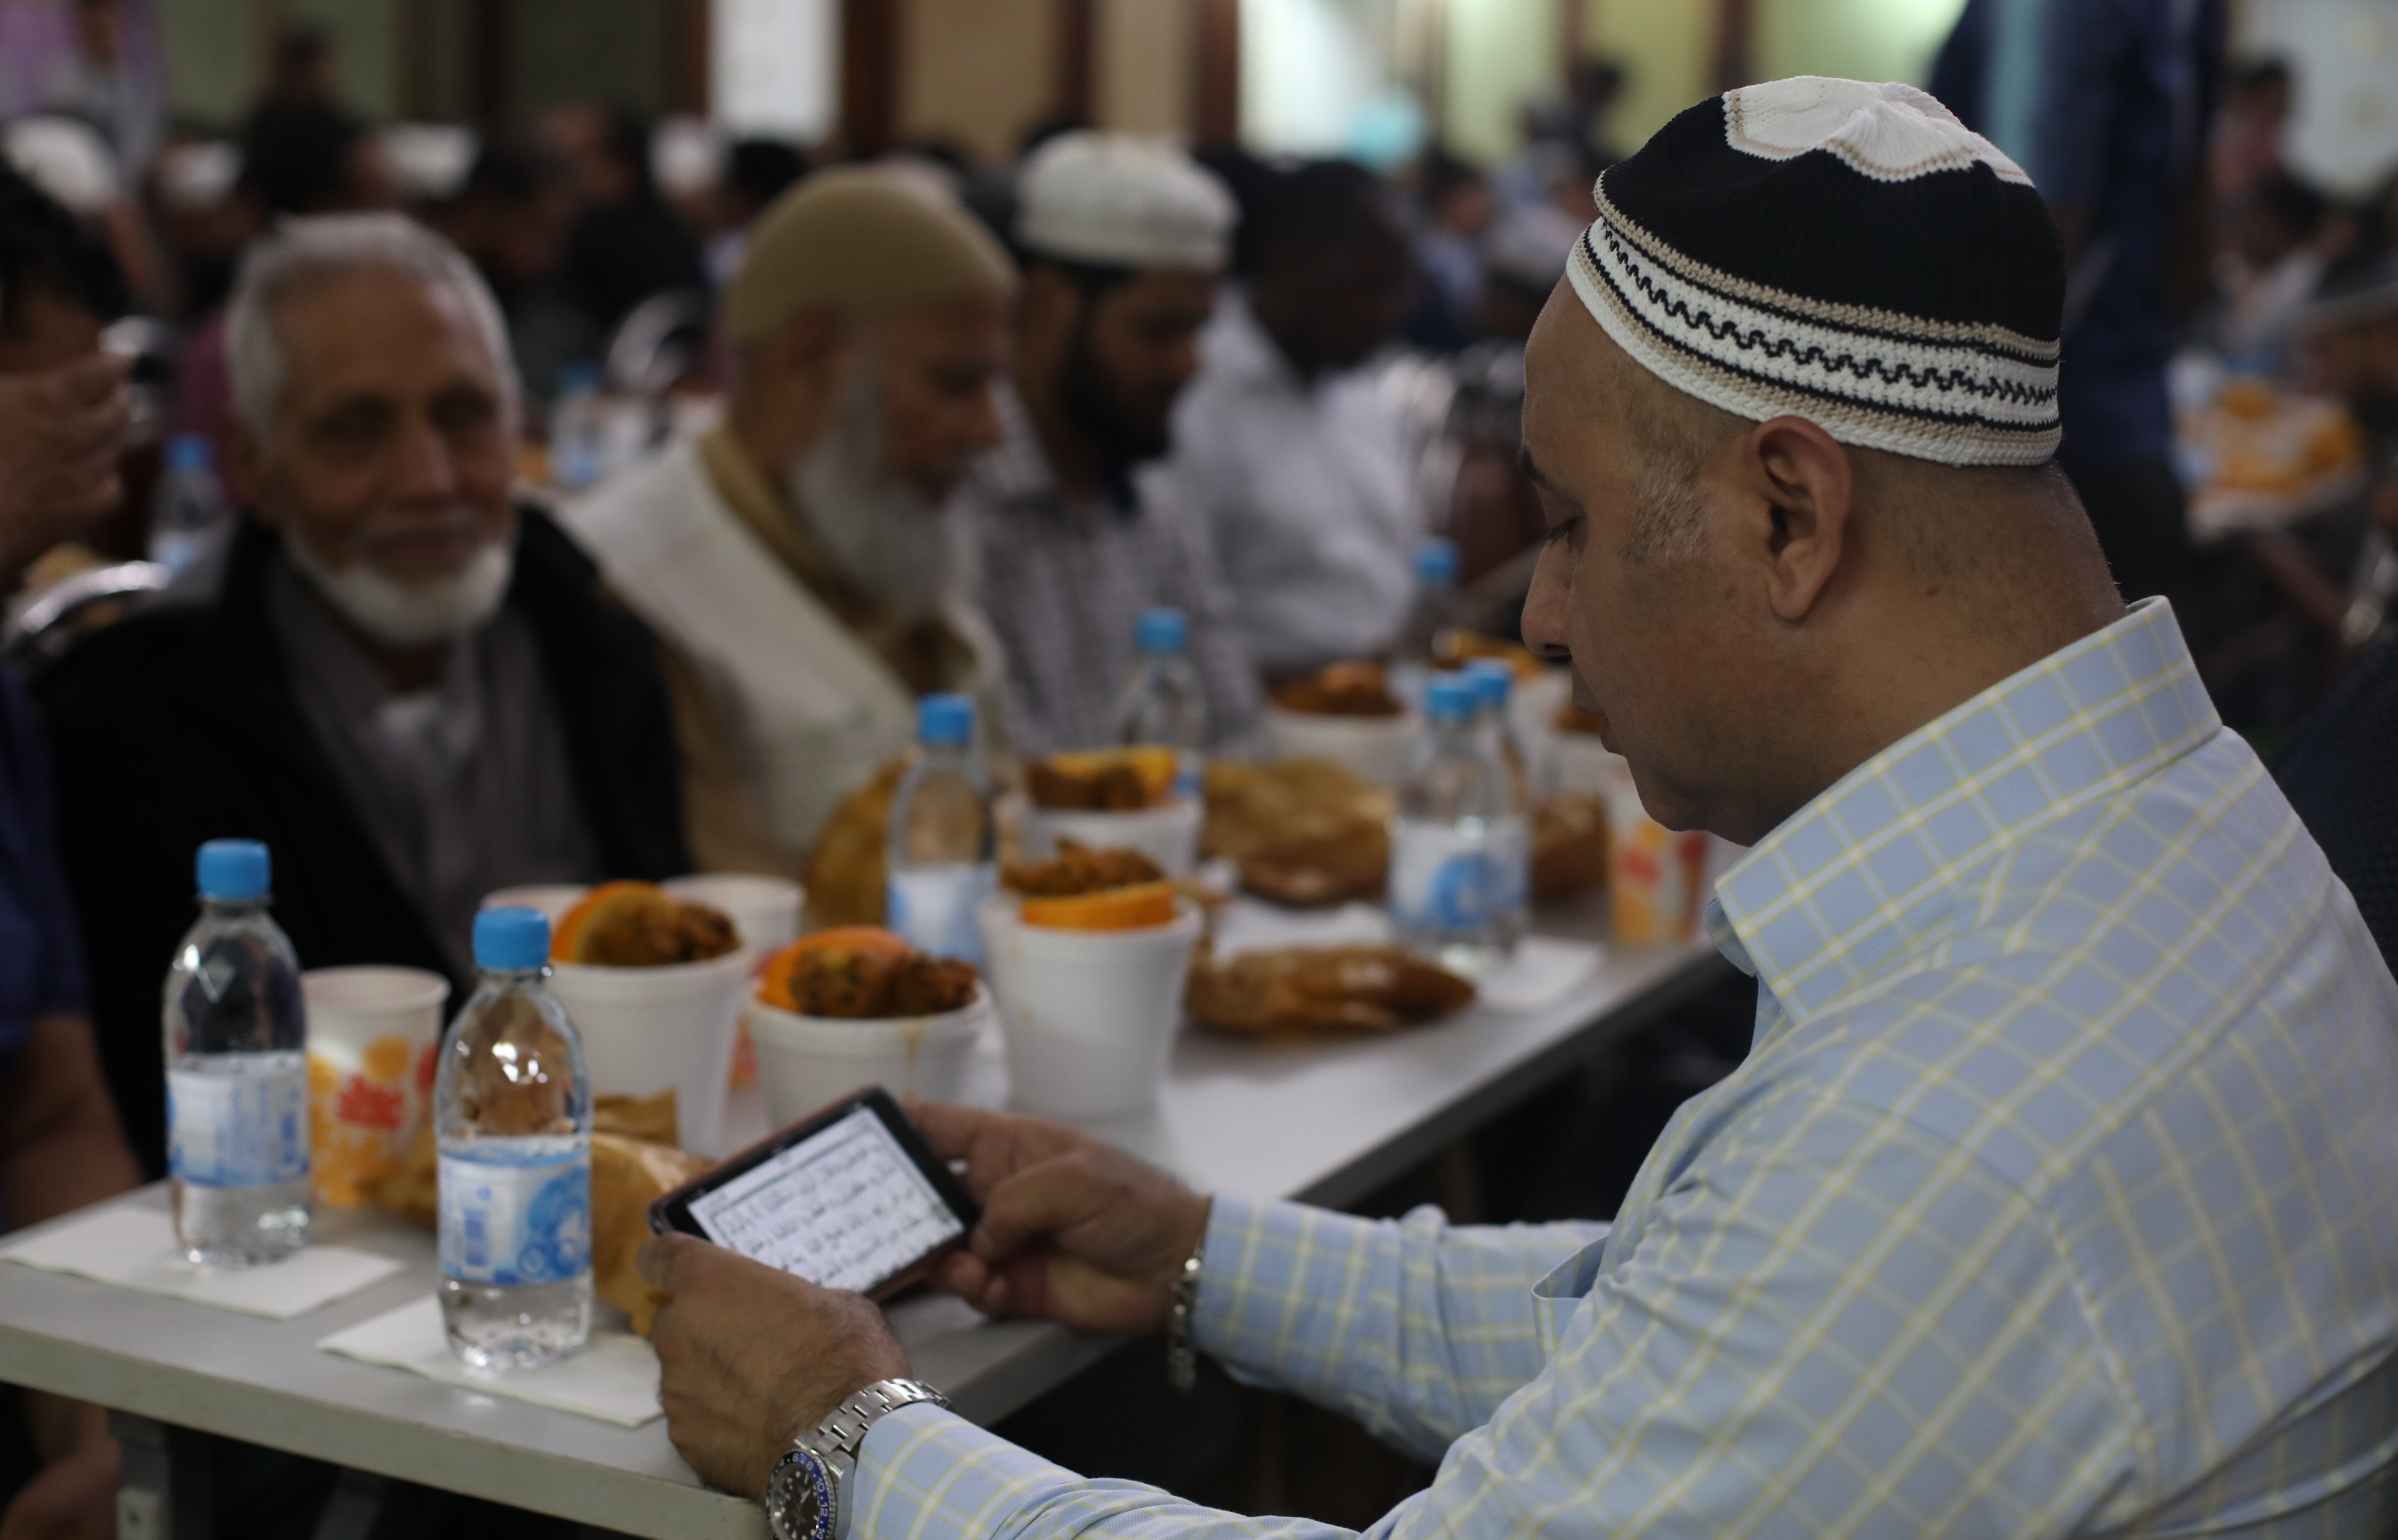 Muslims pray before breaking their fast at Kowloon Mosque in May 2019. Photo: Xiaomei Chen.